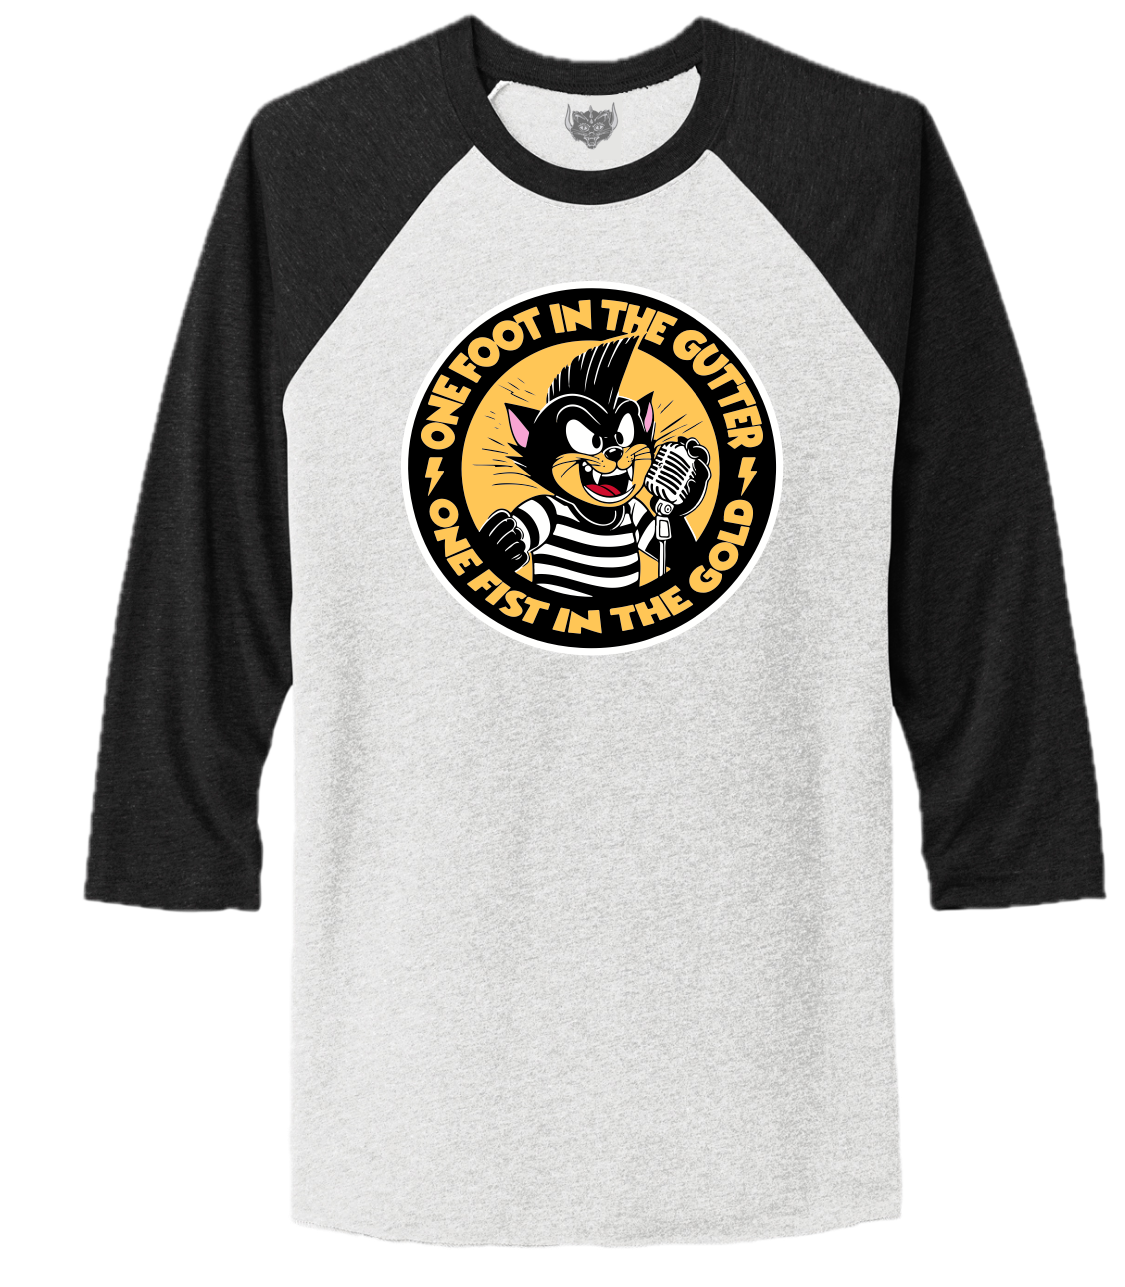 NEW One Foot In The Gutter OFITG cat baseball jersey (ships May 1 )